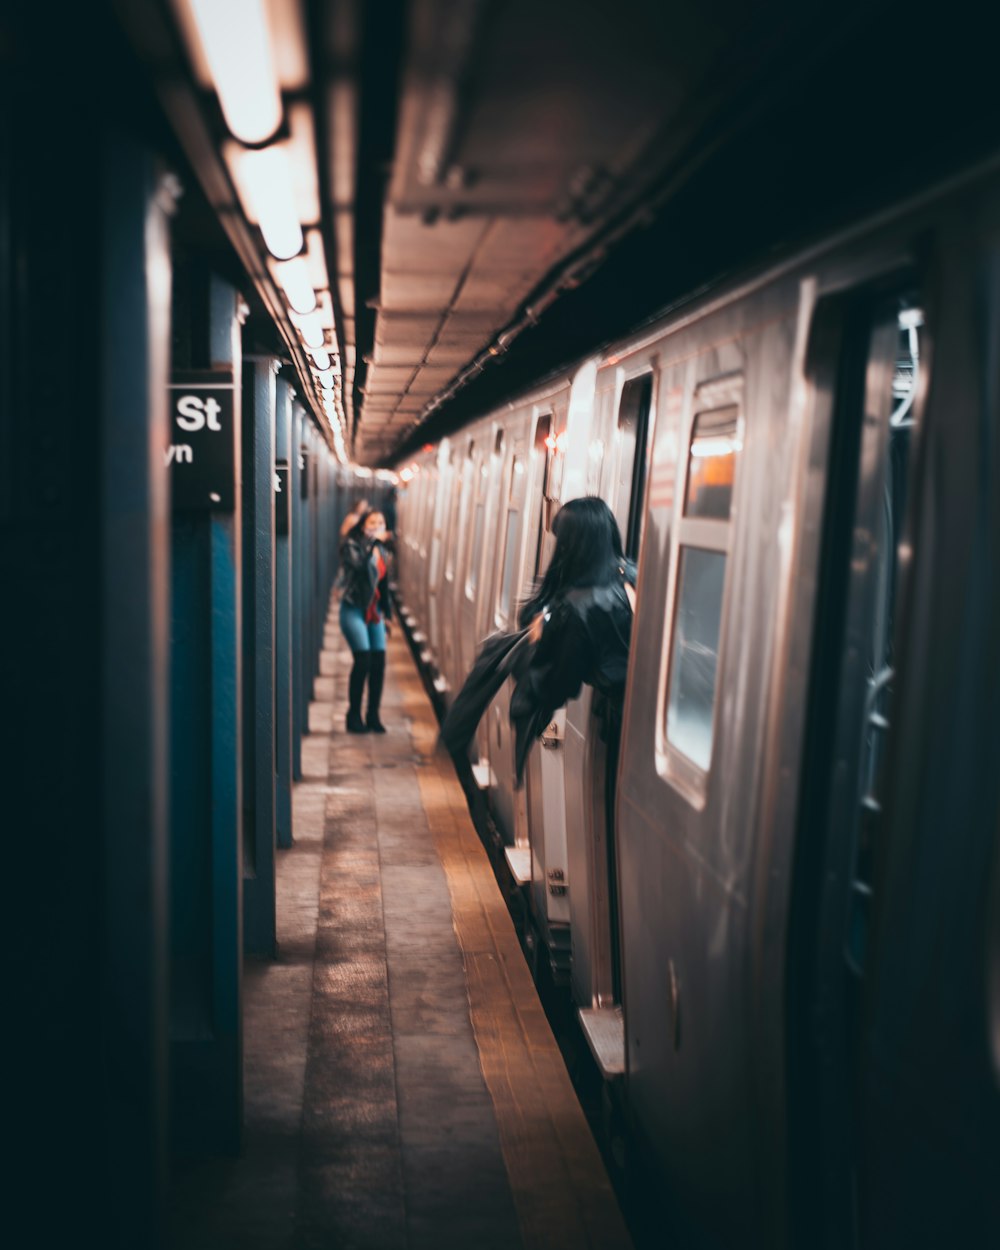 two people standing on a subway platform next to a train